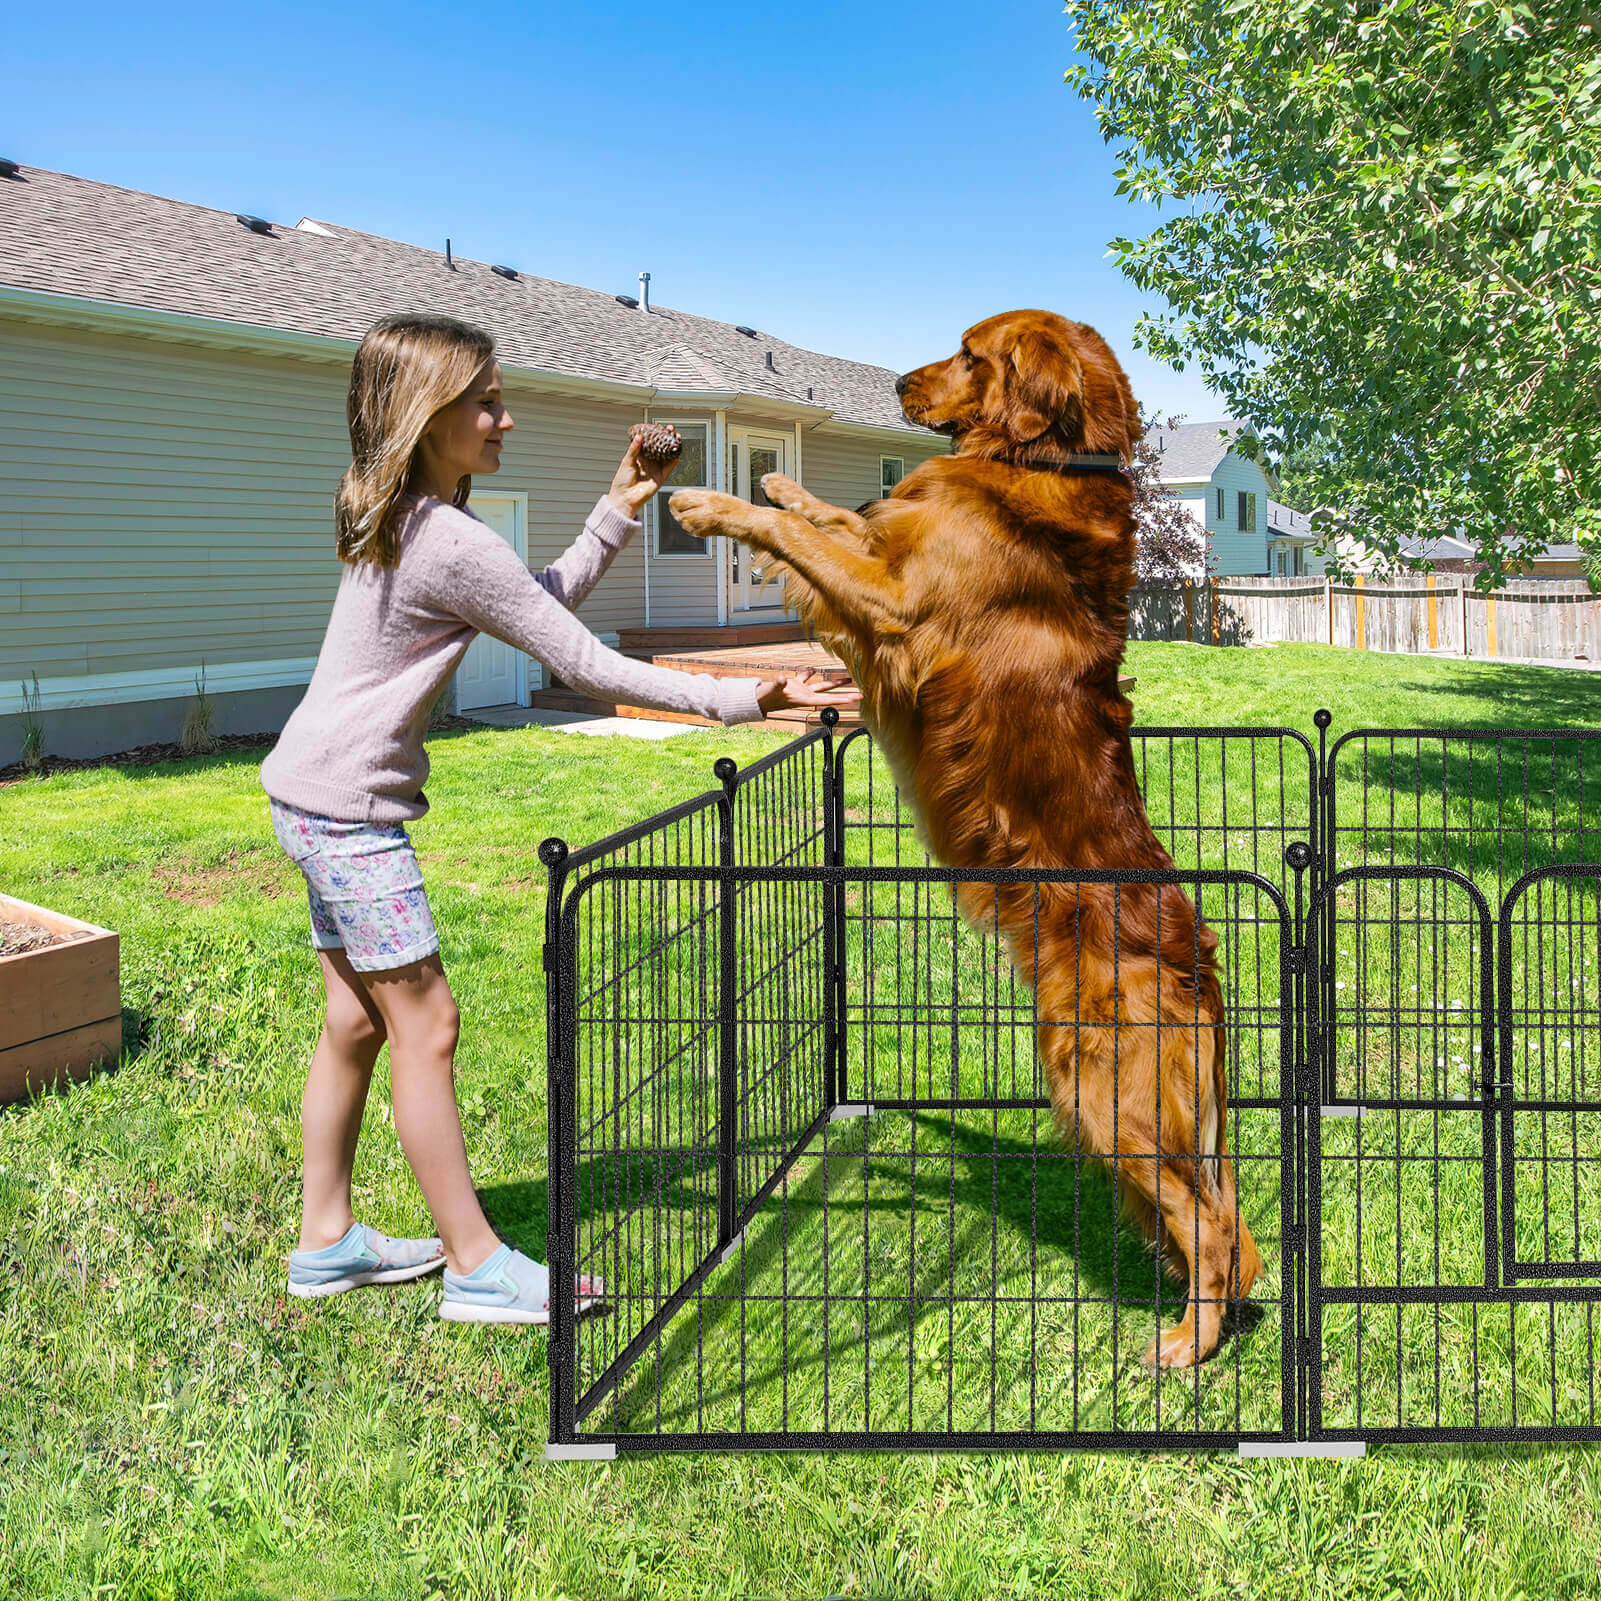 Elecwish High-Security Pet Fences for dog training and playing